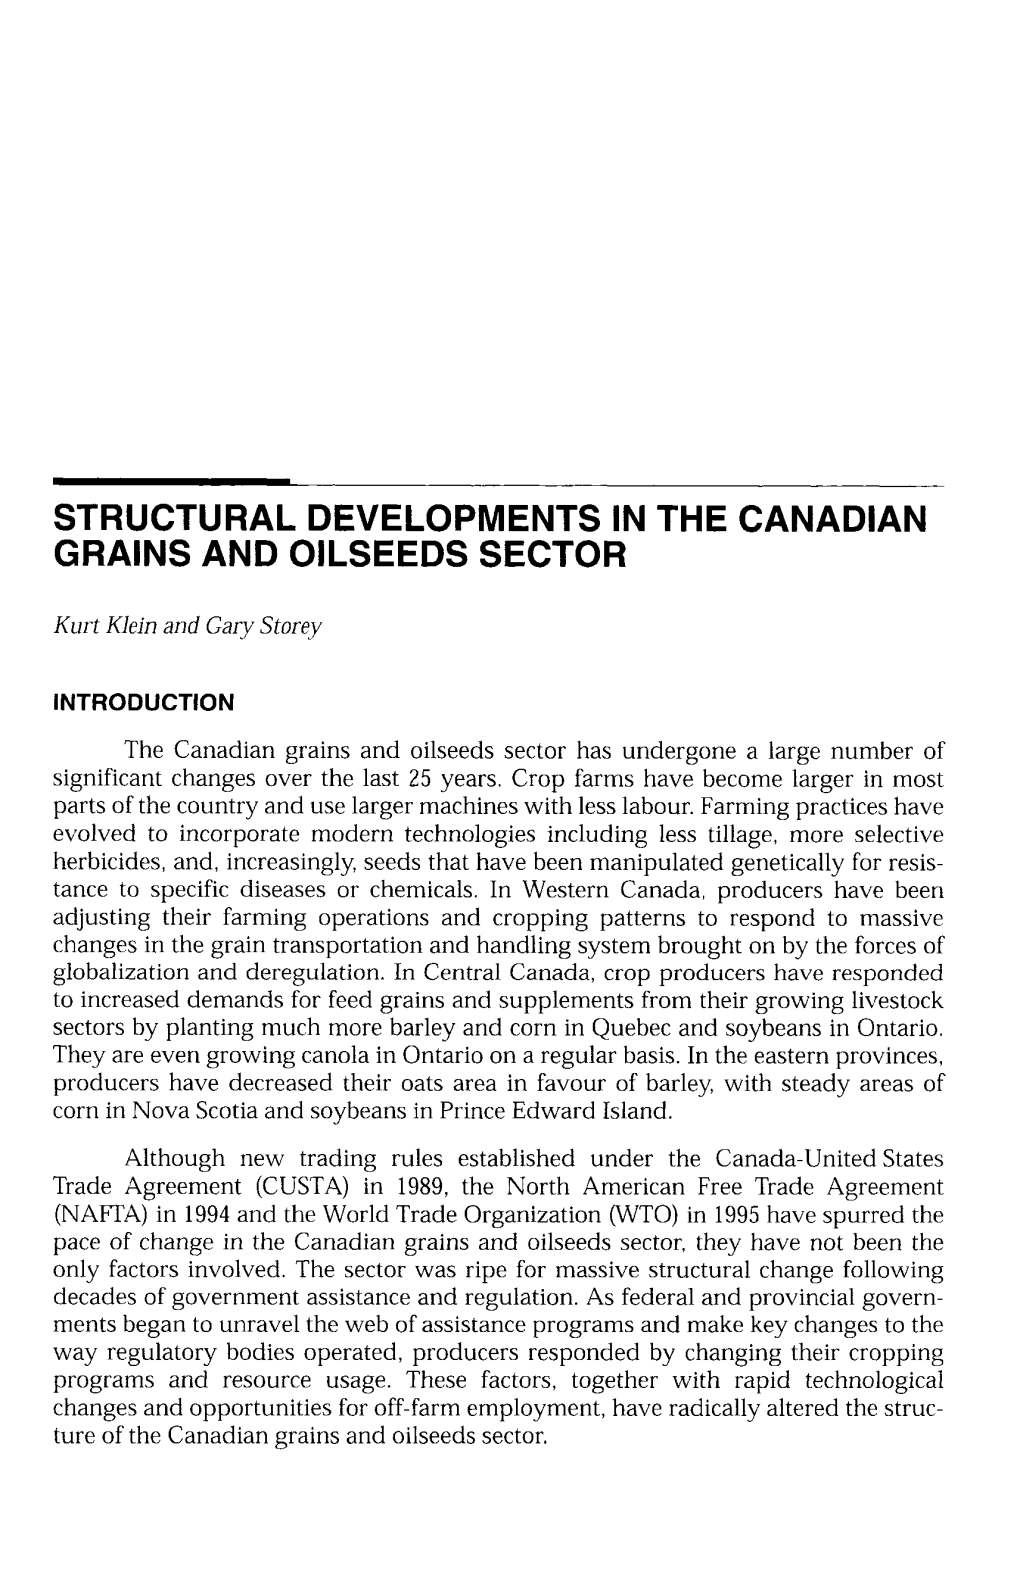 Structural Developments in the Canadian Grains and Oilseeds Sector